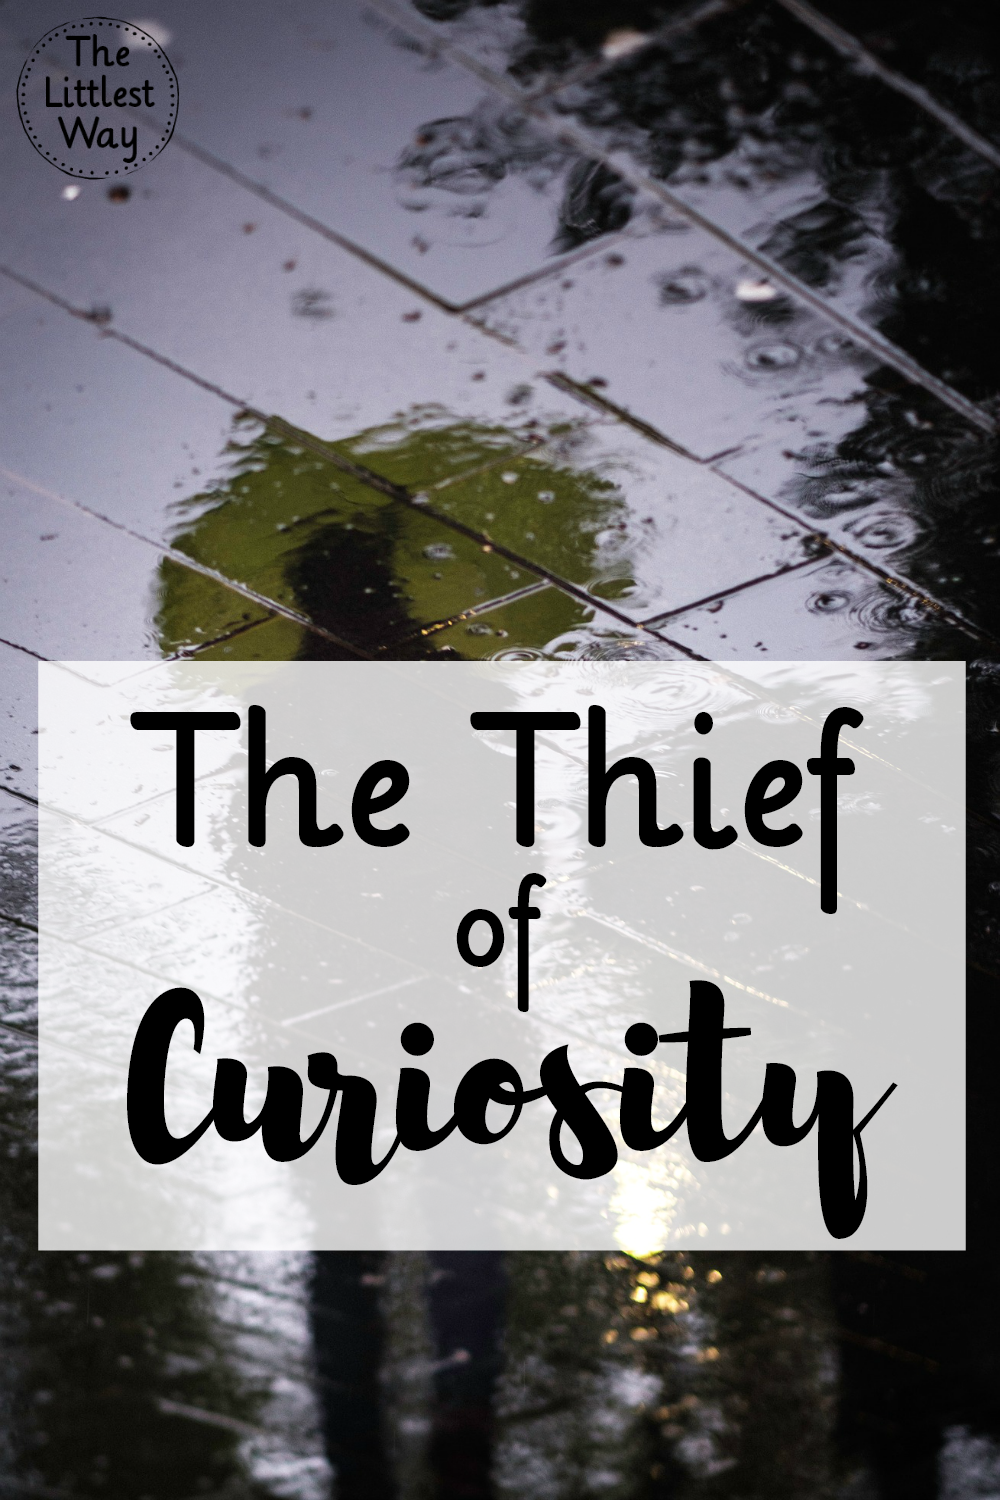 Curiosity is a thief that only comes to kill, steal, and destroy. Sound familiar? Sounds like a tactic of the enemy to me.